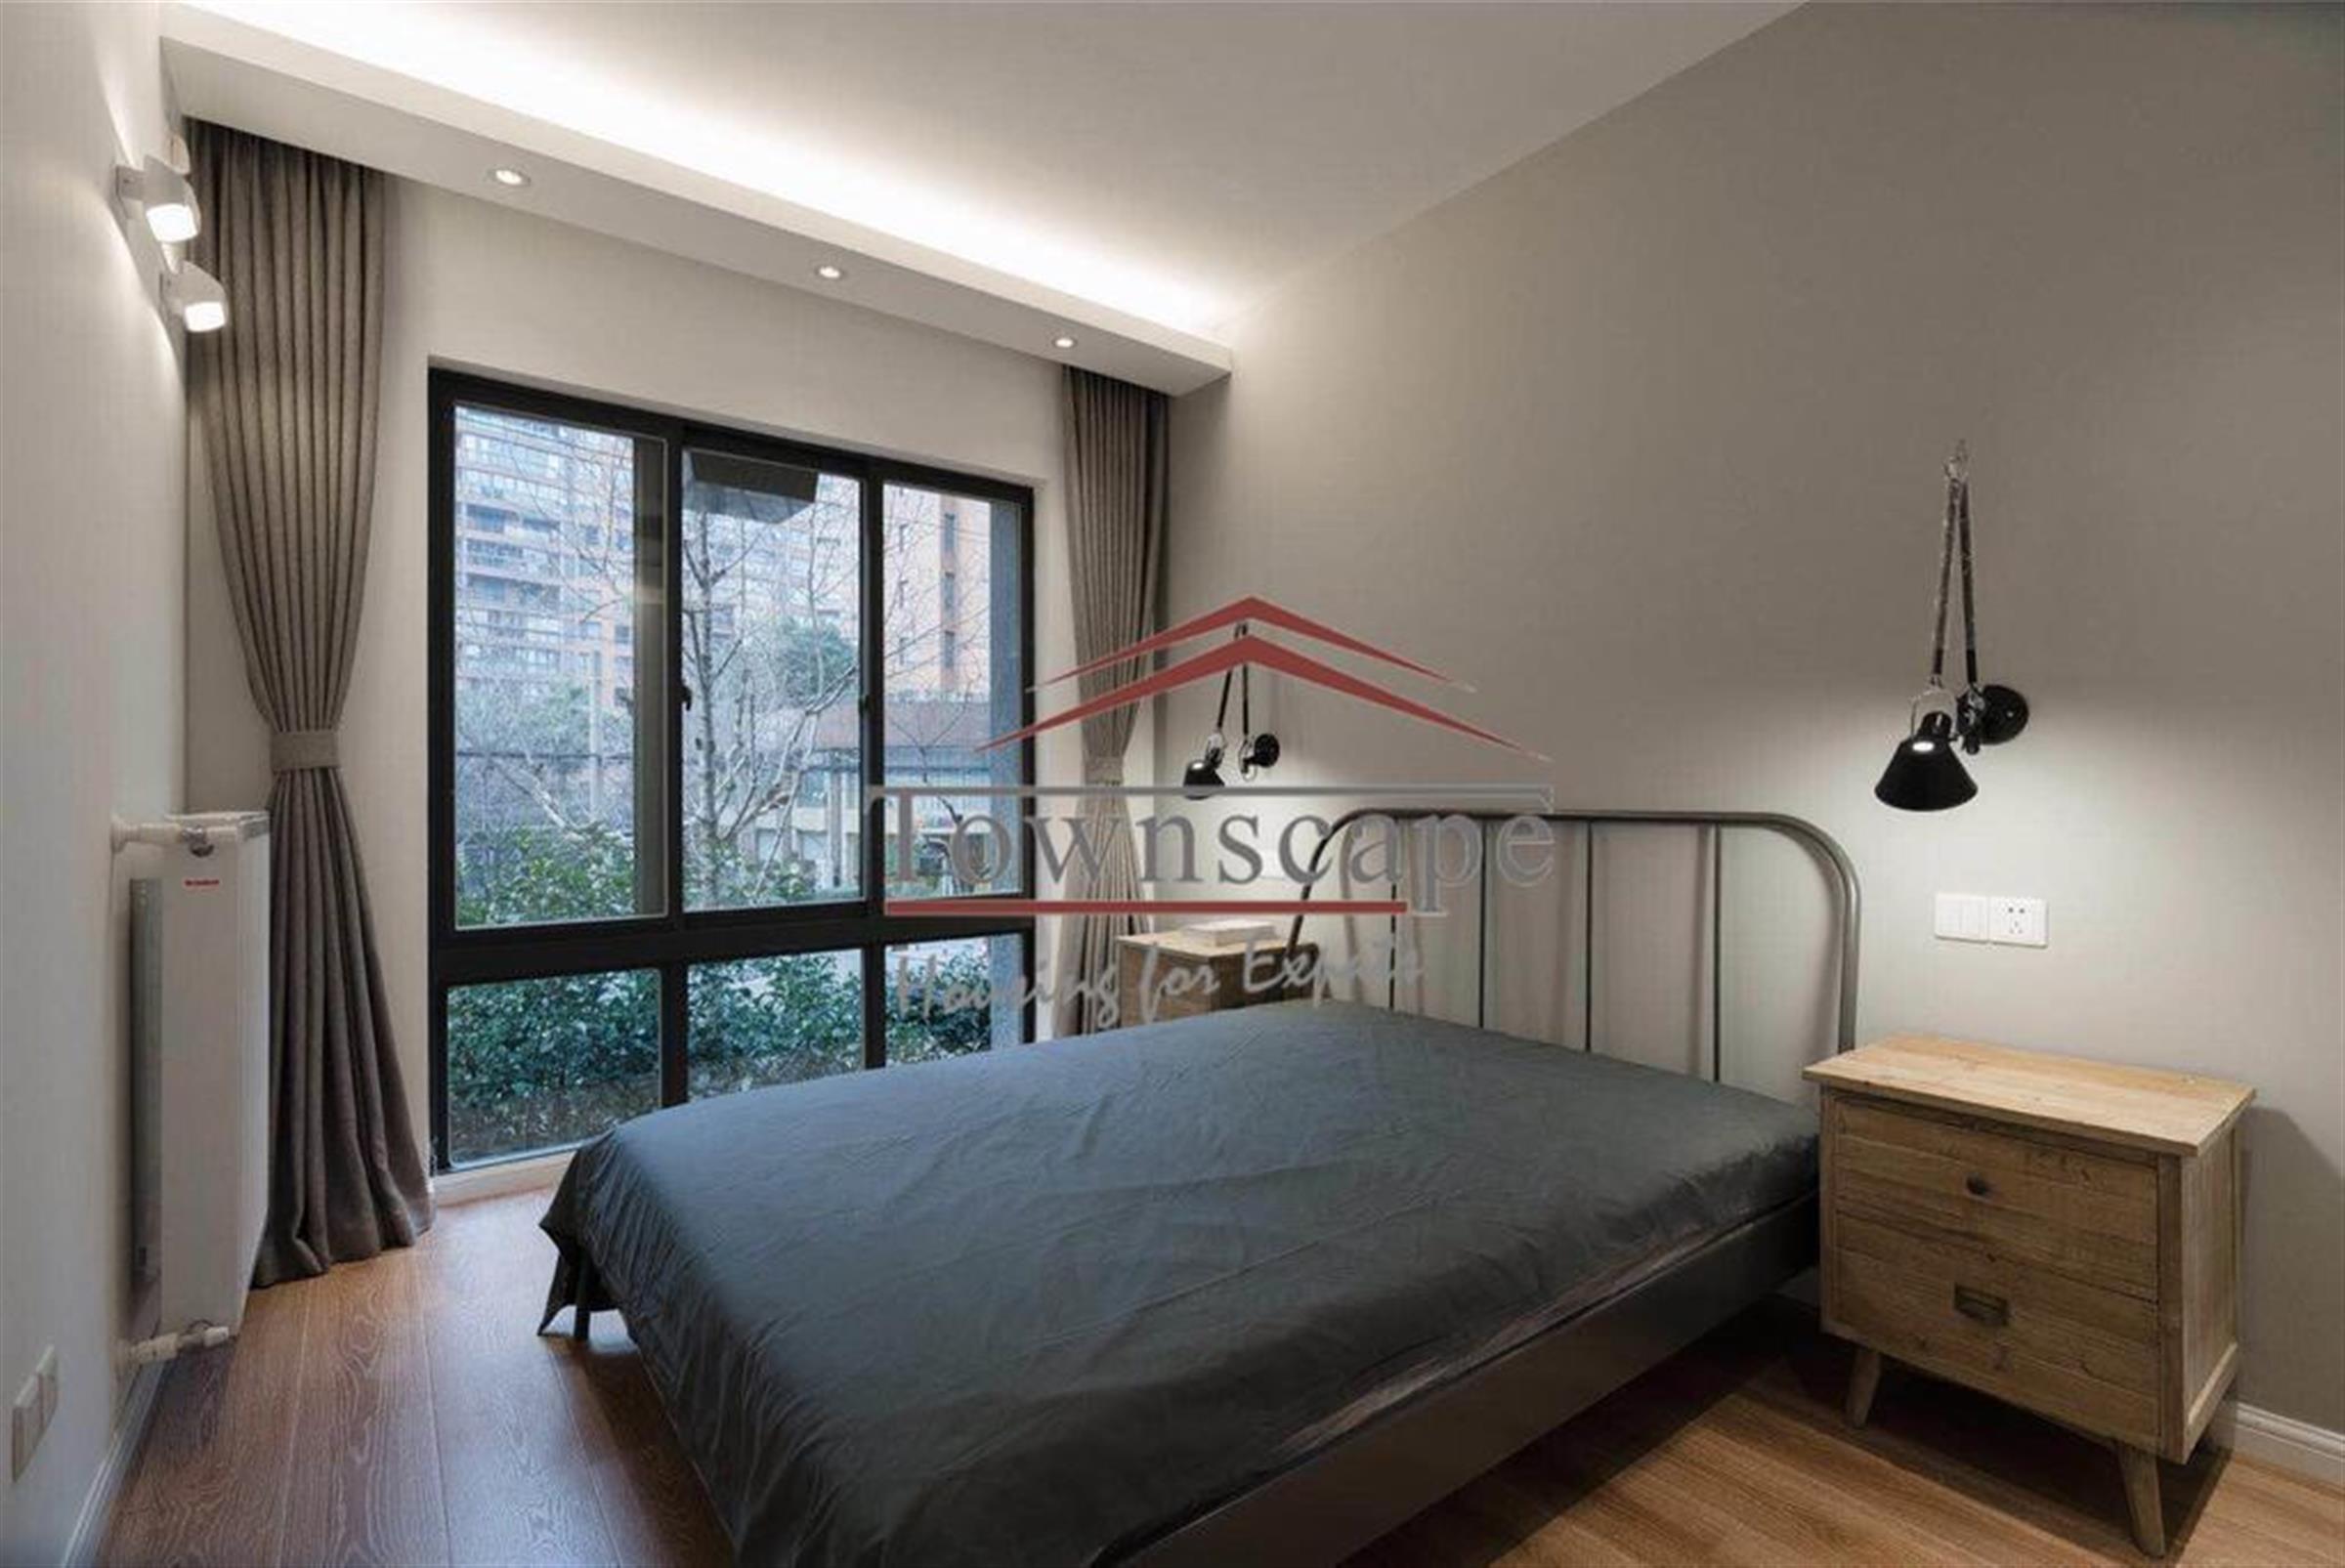 new furniture Rare Downtown Jing’an 4BR apartment for Rent in Shanghai